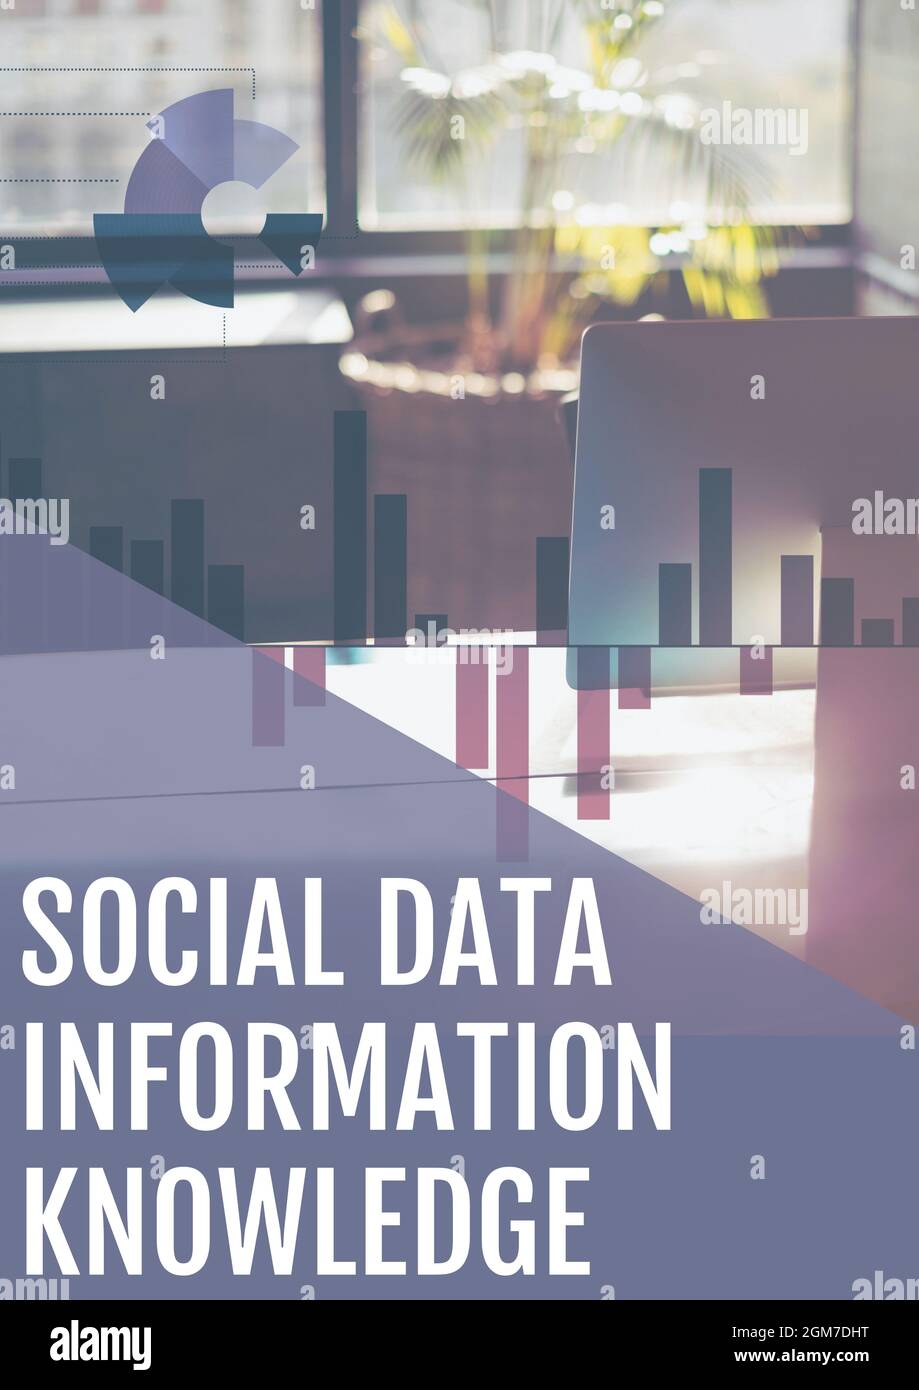 Social data information knowledge text on blue banner and bar graph icon against office Stock Photo